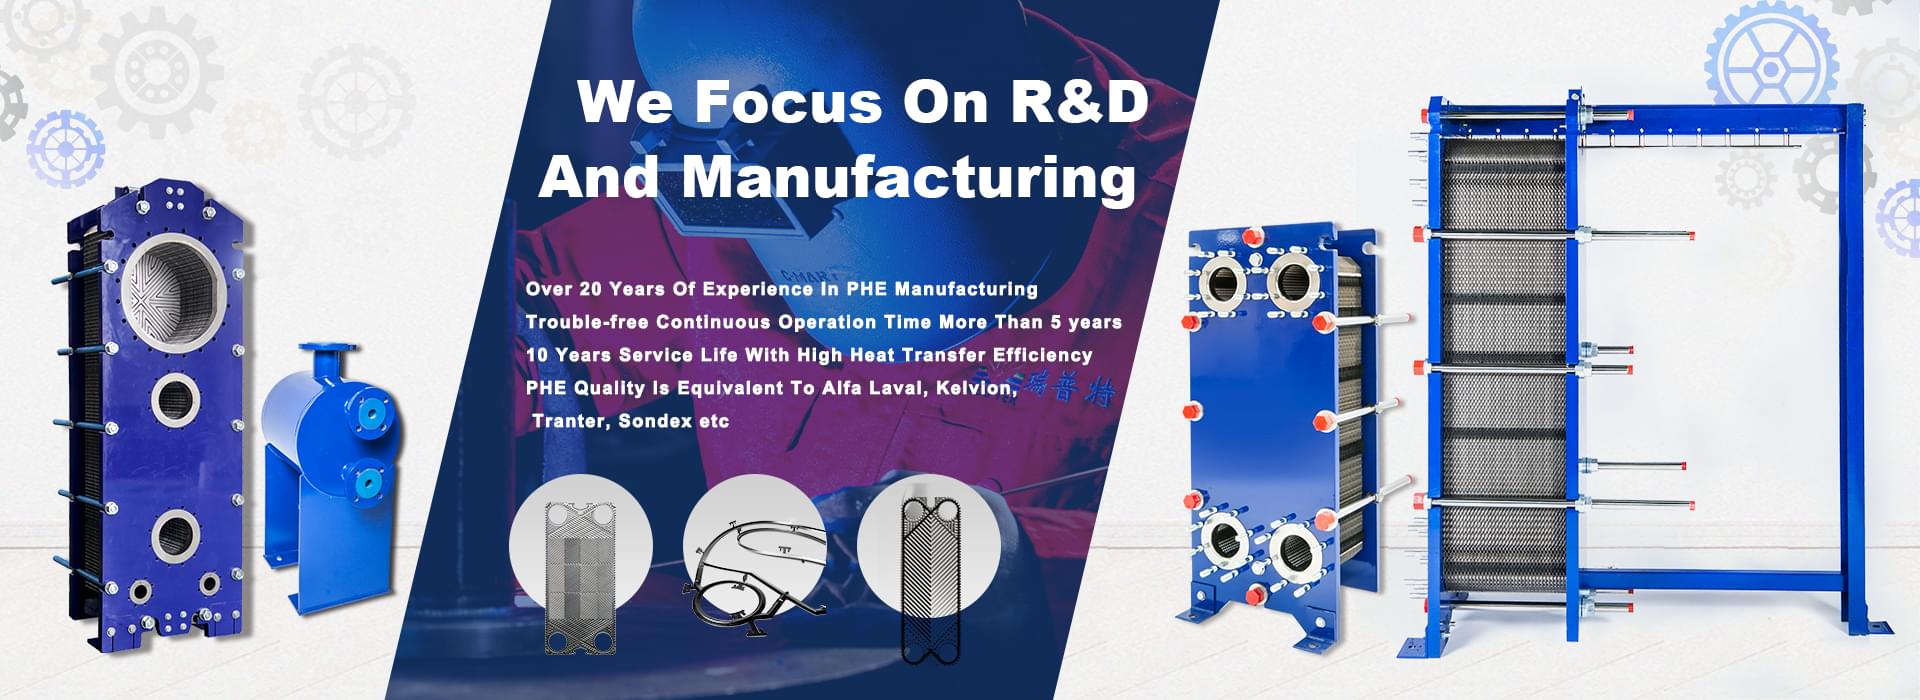 We focus on R&D and manufacturing